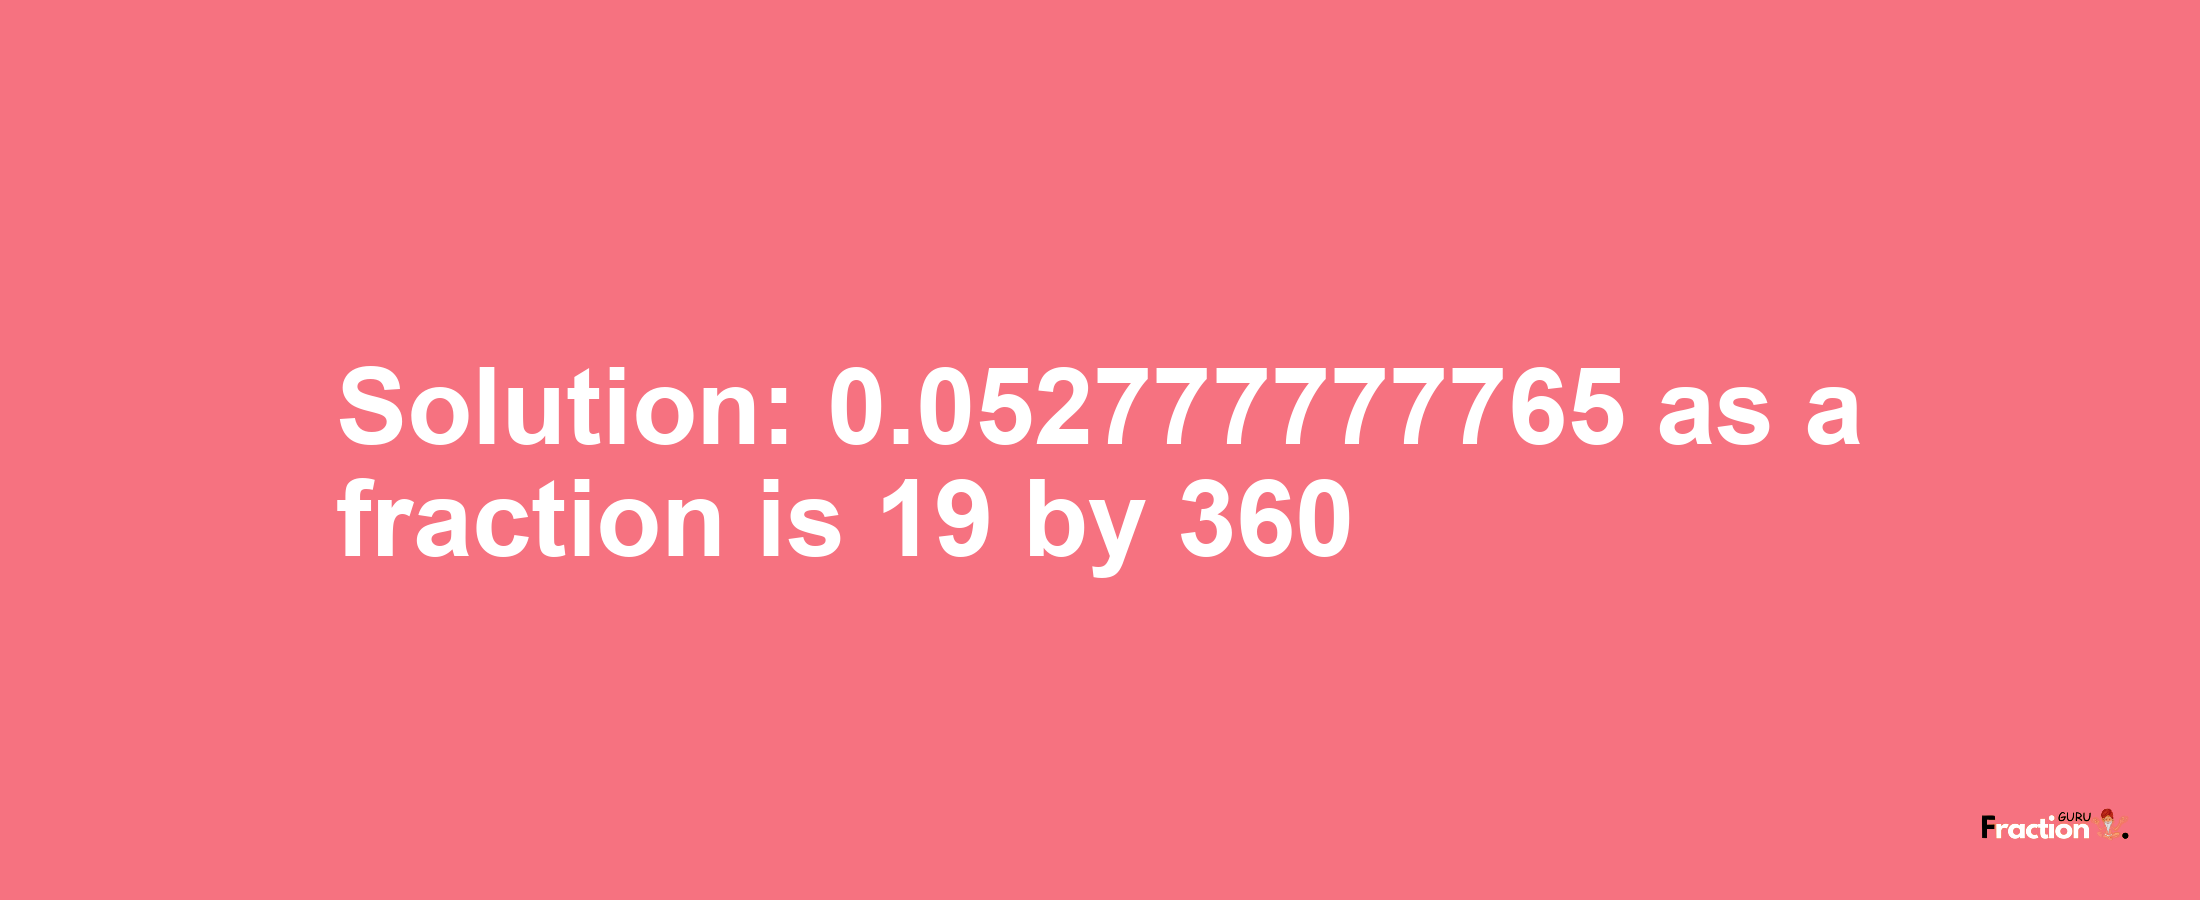 Solution:0.052777777765 as a fraction is 19/360